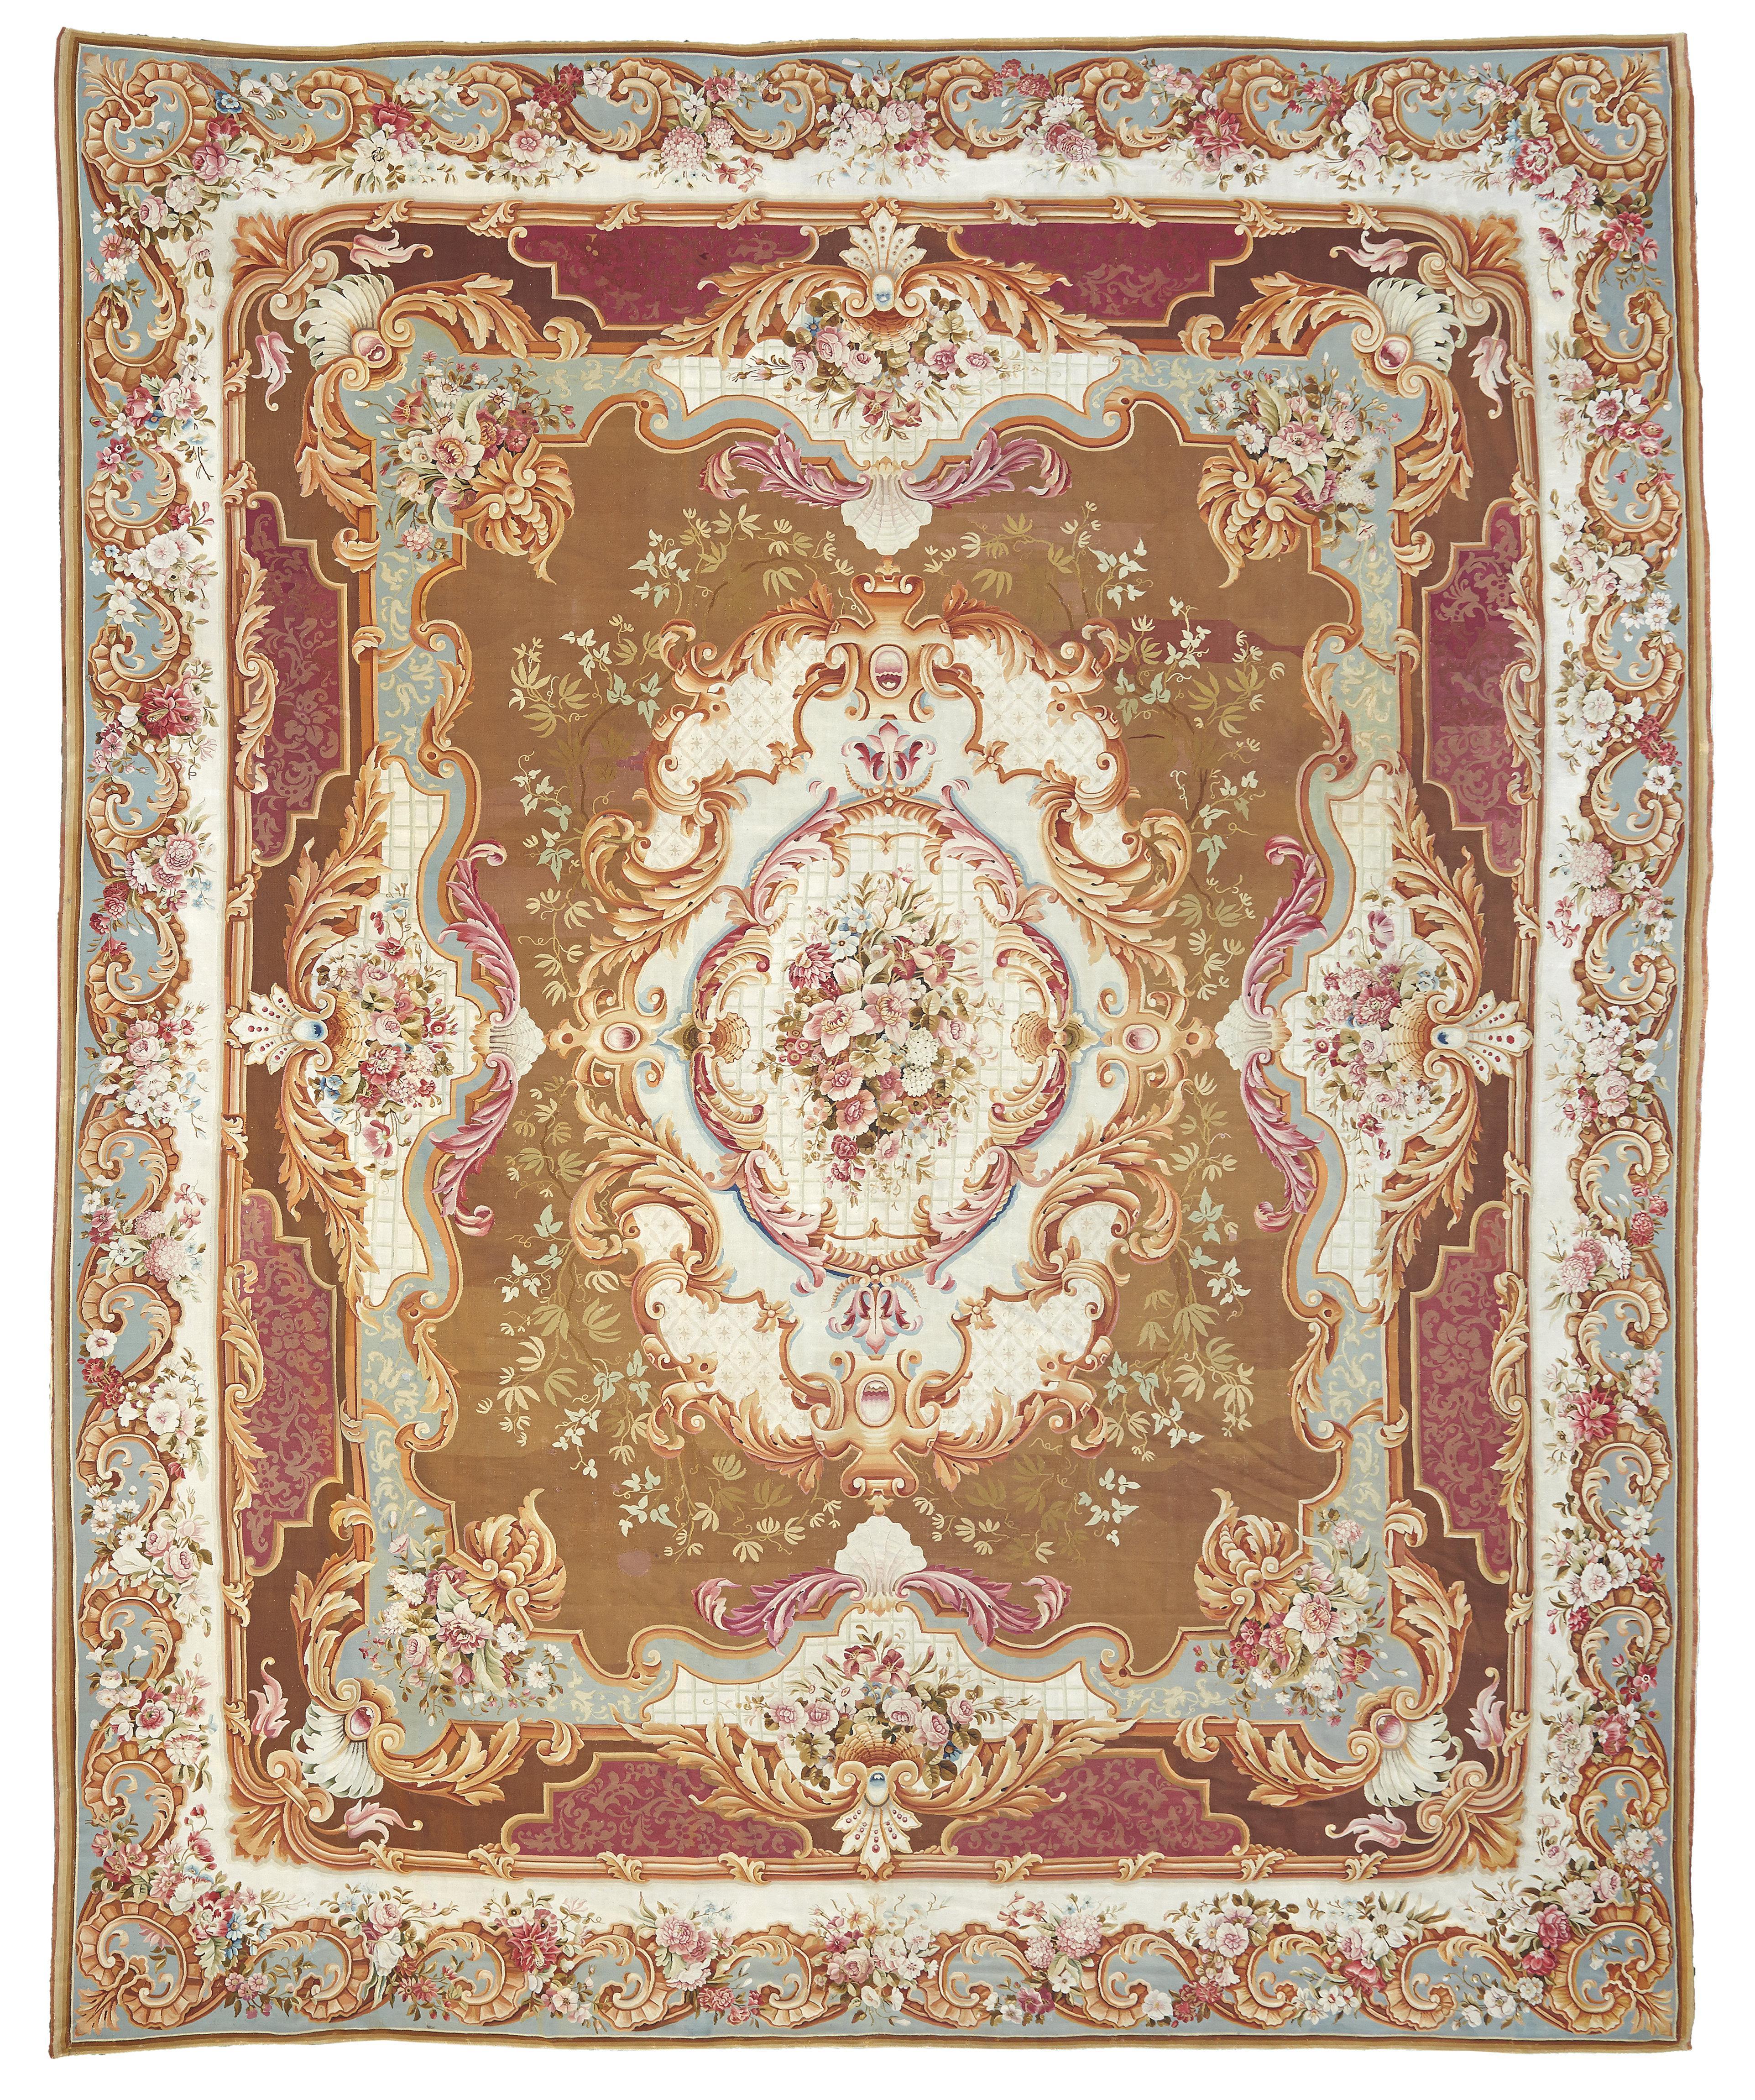 A monumental 19th century French palace size handwoven Aubusson rug. The classical rectangular rug presents with crisp detailing and deep coloration in Beige, Brown, Maroon, and Teal. The central medallion with a floral bouquet within foliate